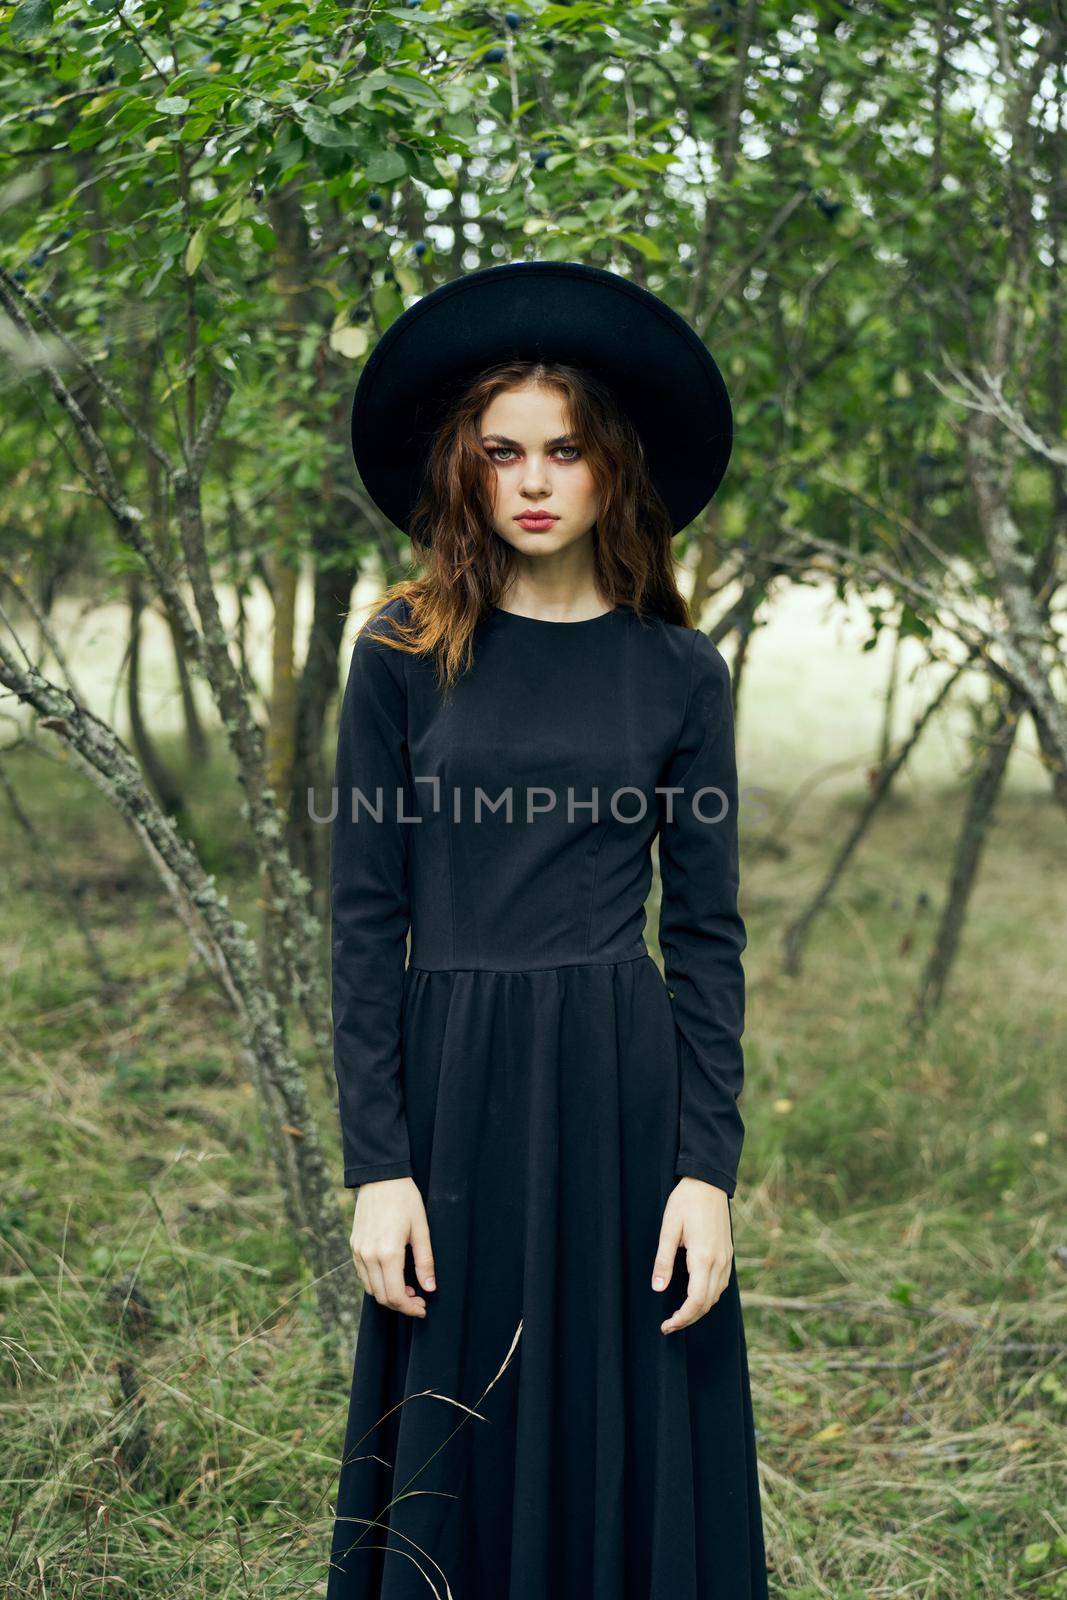 witch in the woods posing costume halloween gothic style. High quality photo